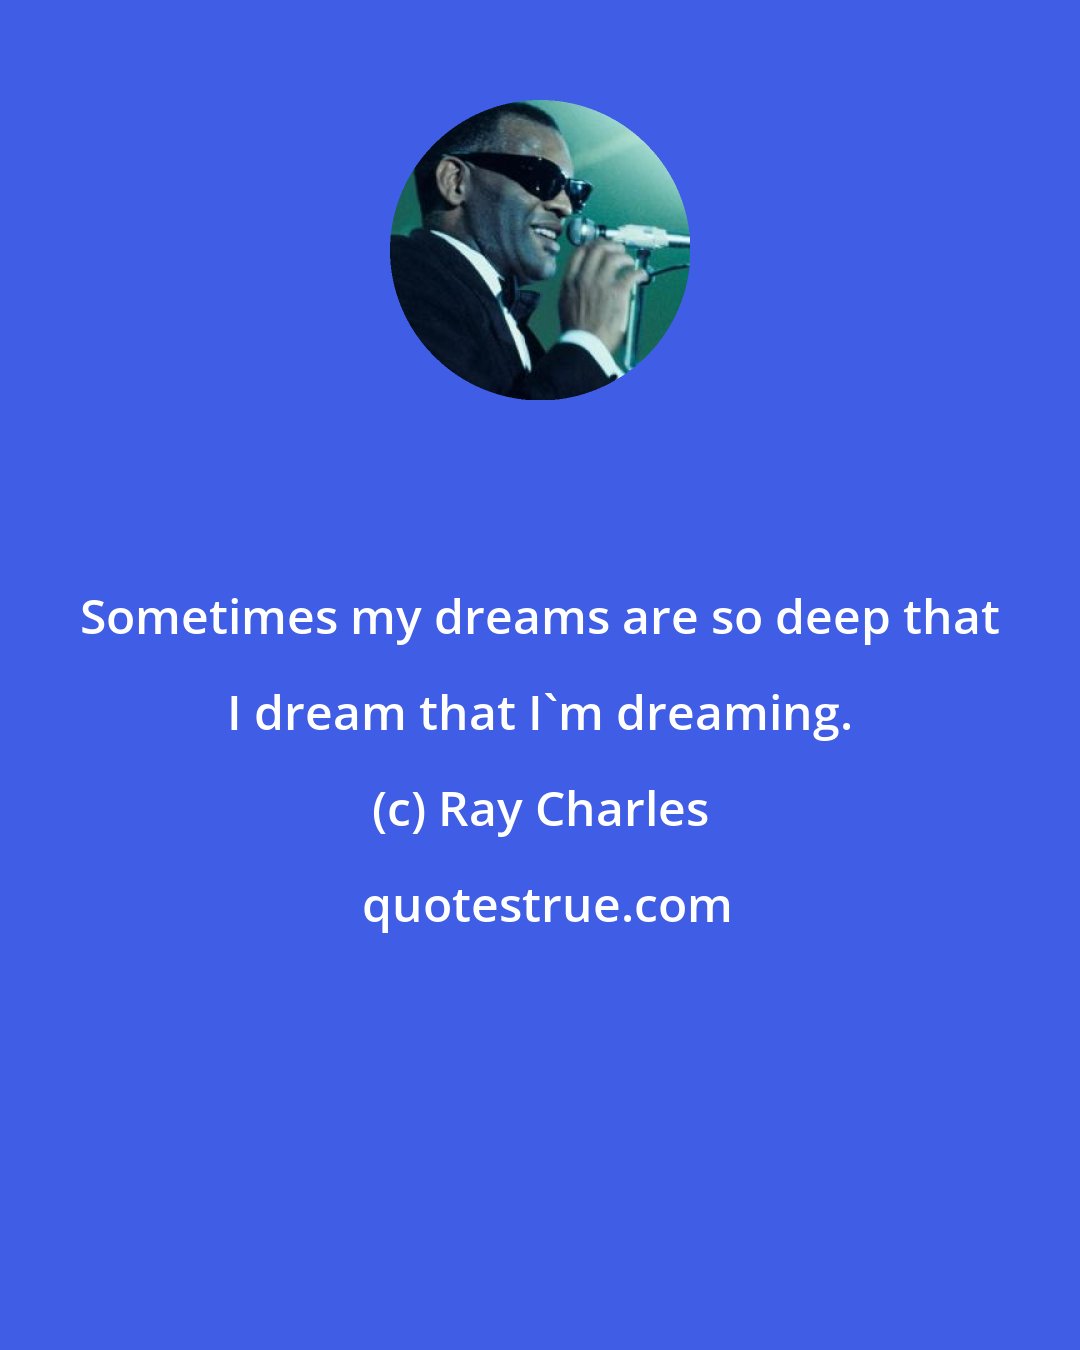 Ray Charles: Sometimes my dreams are so deep that I dream that I'm dreaming.